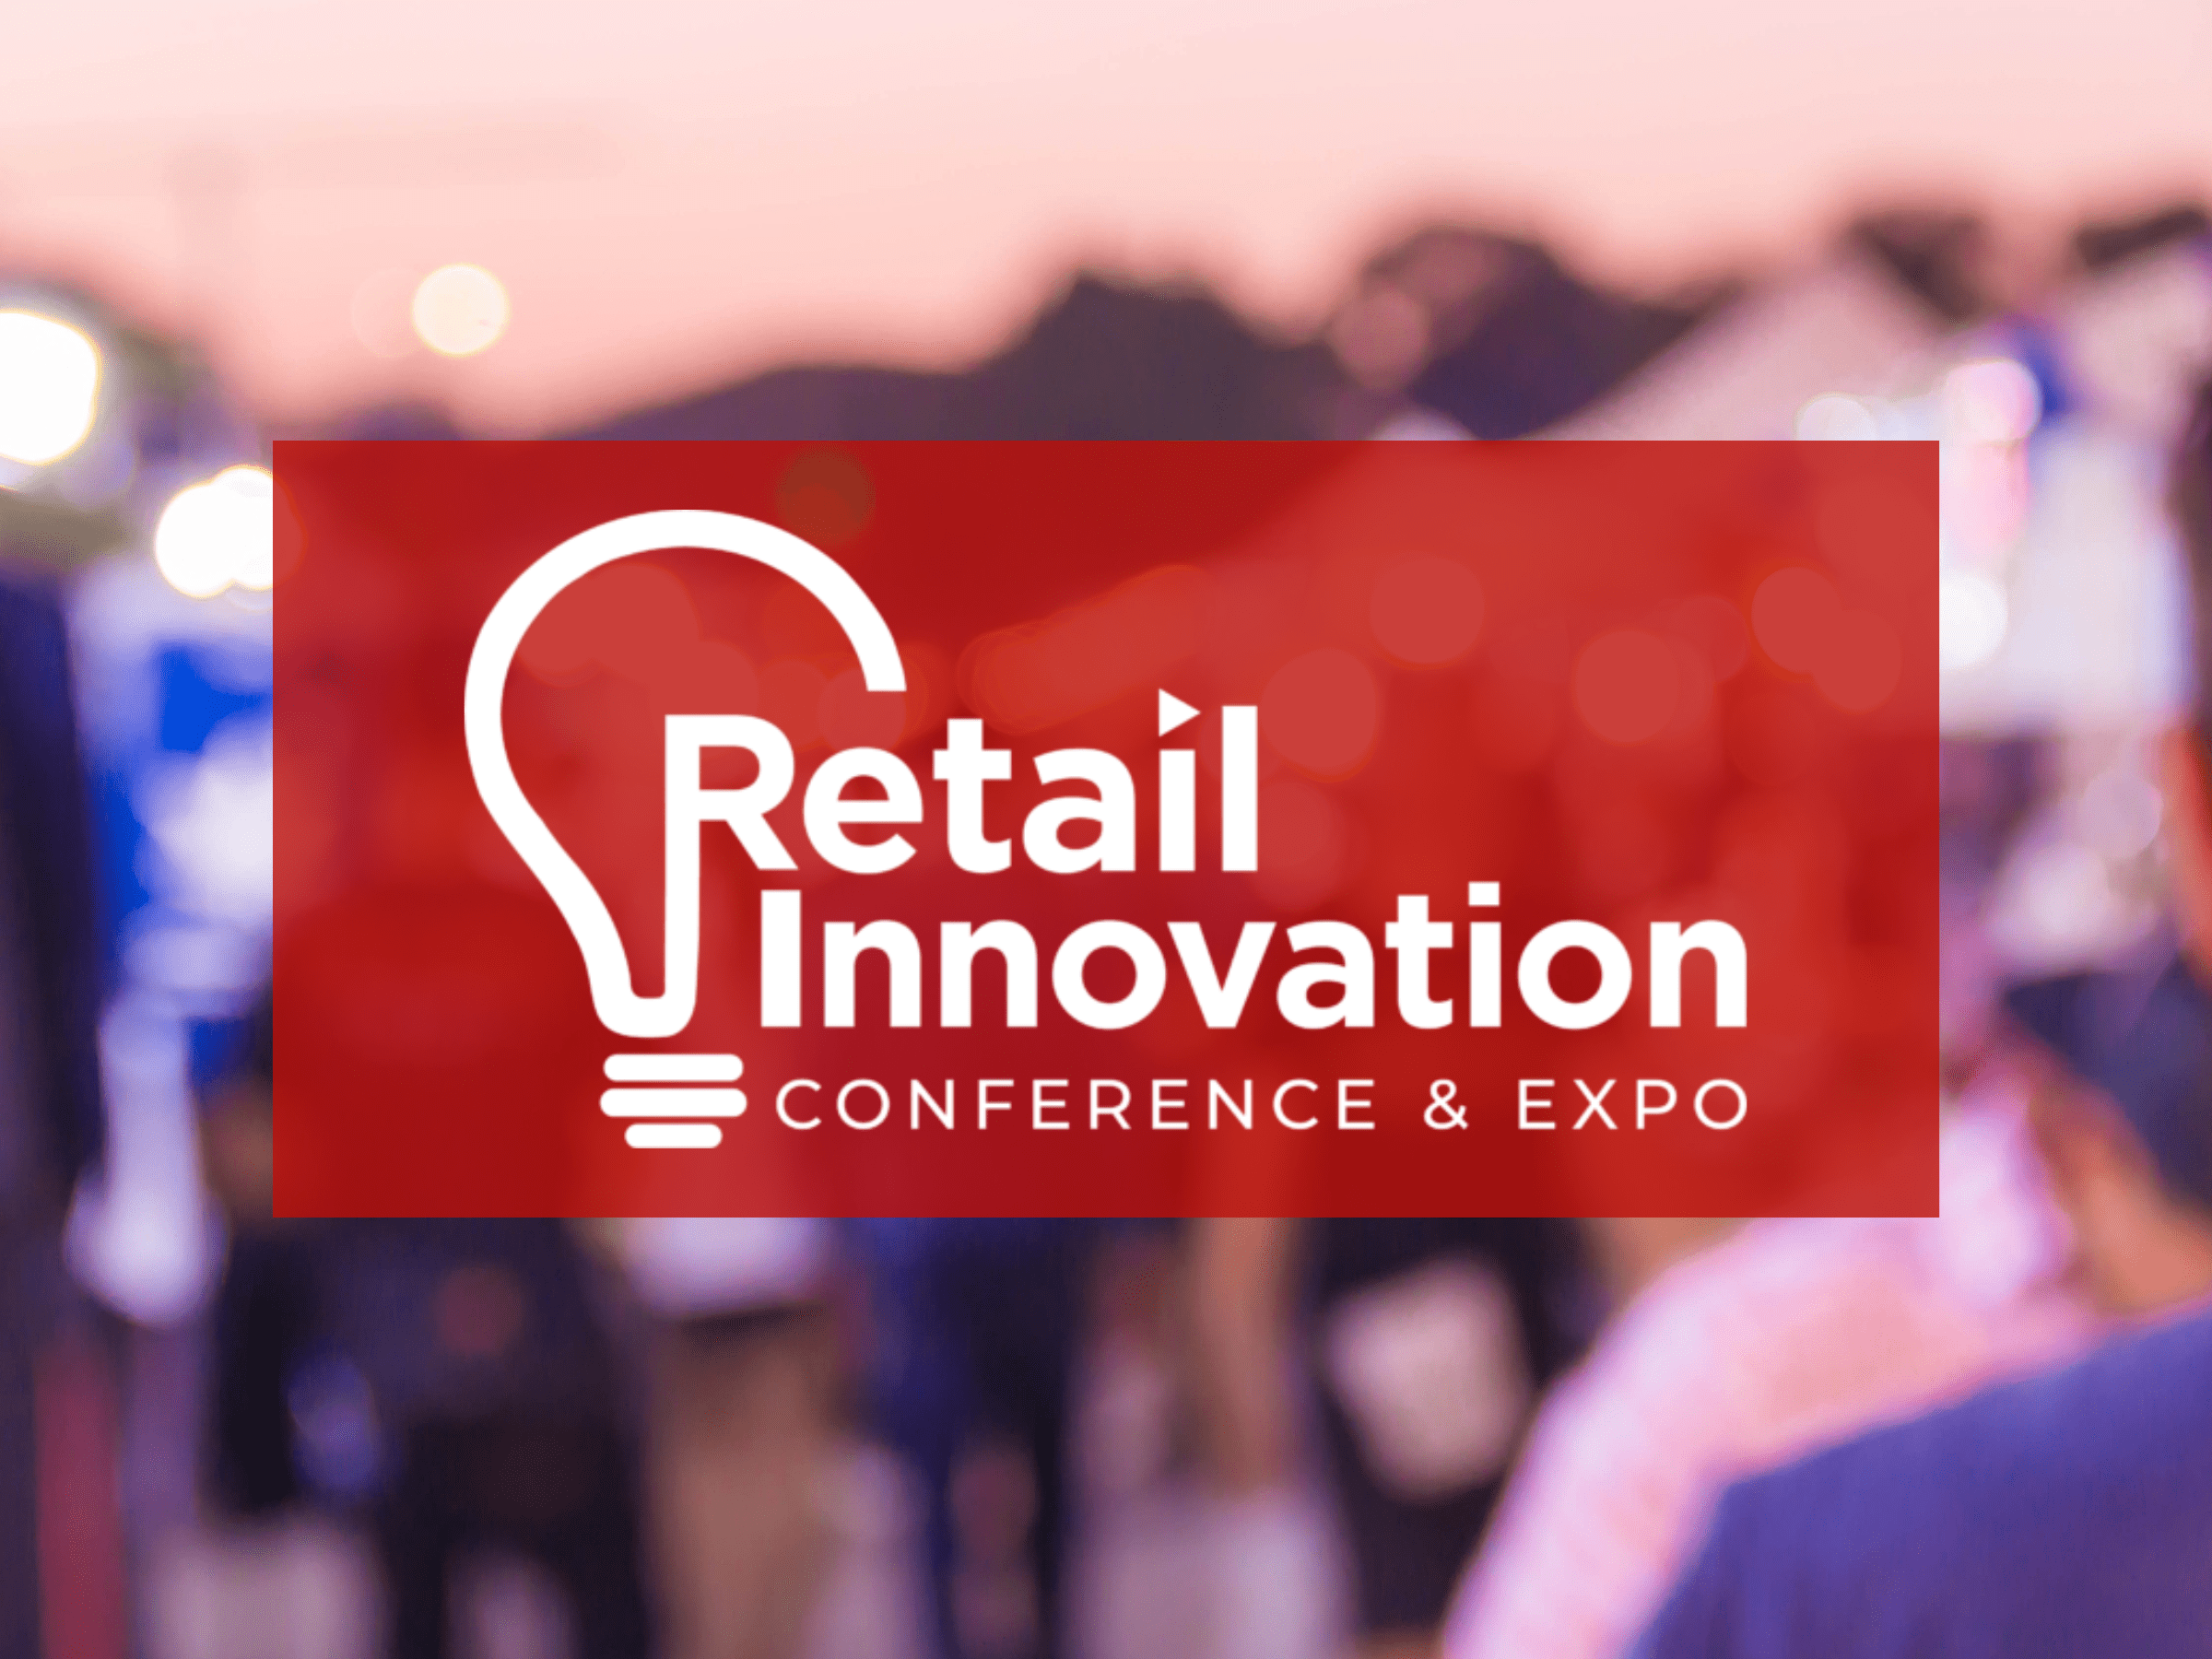 Retail Innovation Conference and Expo